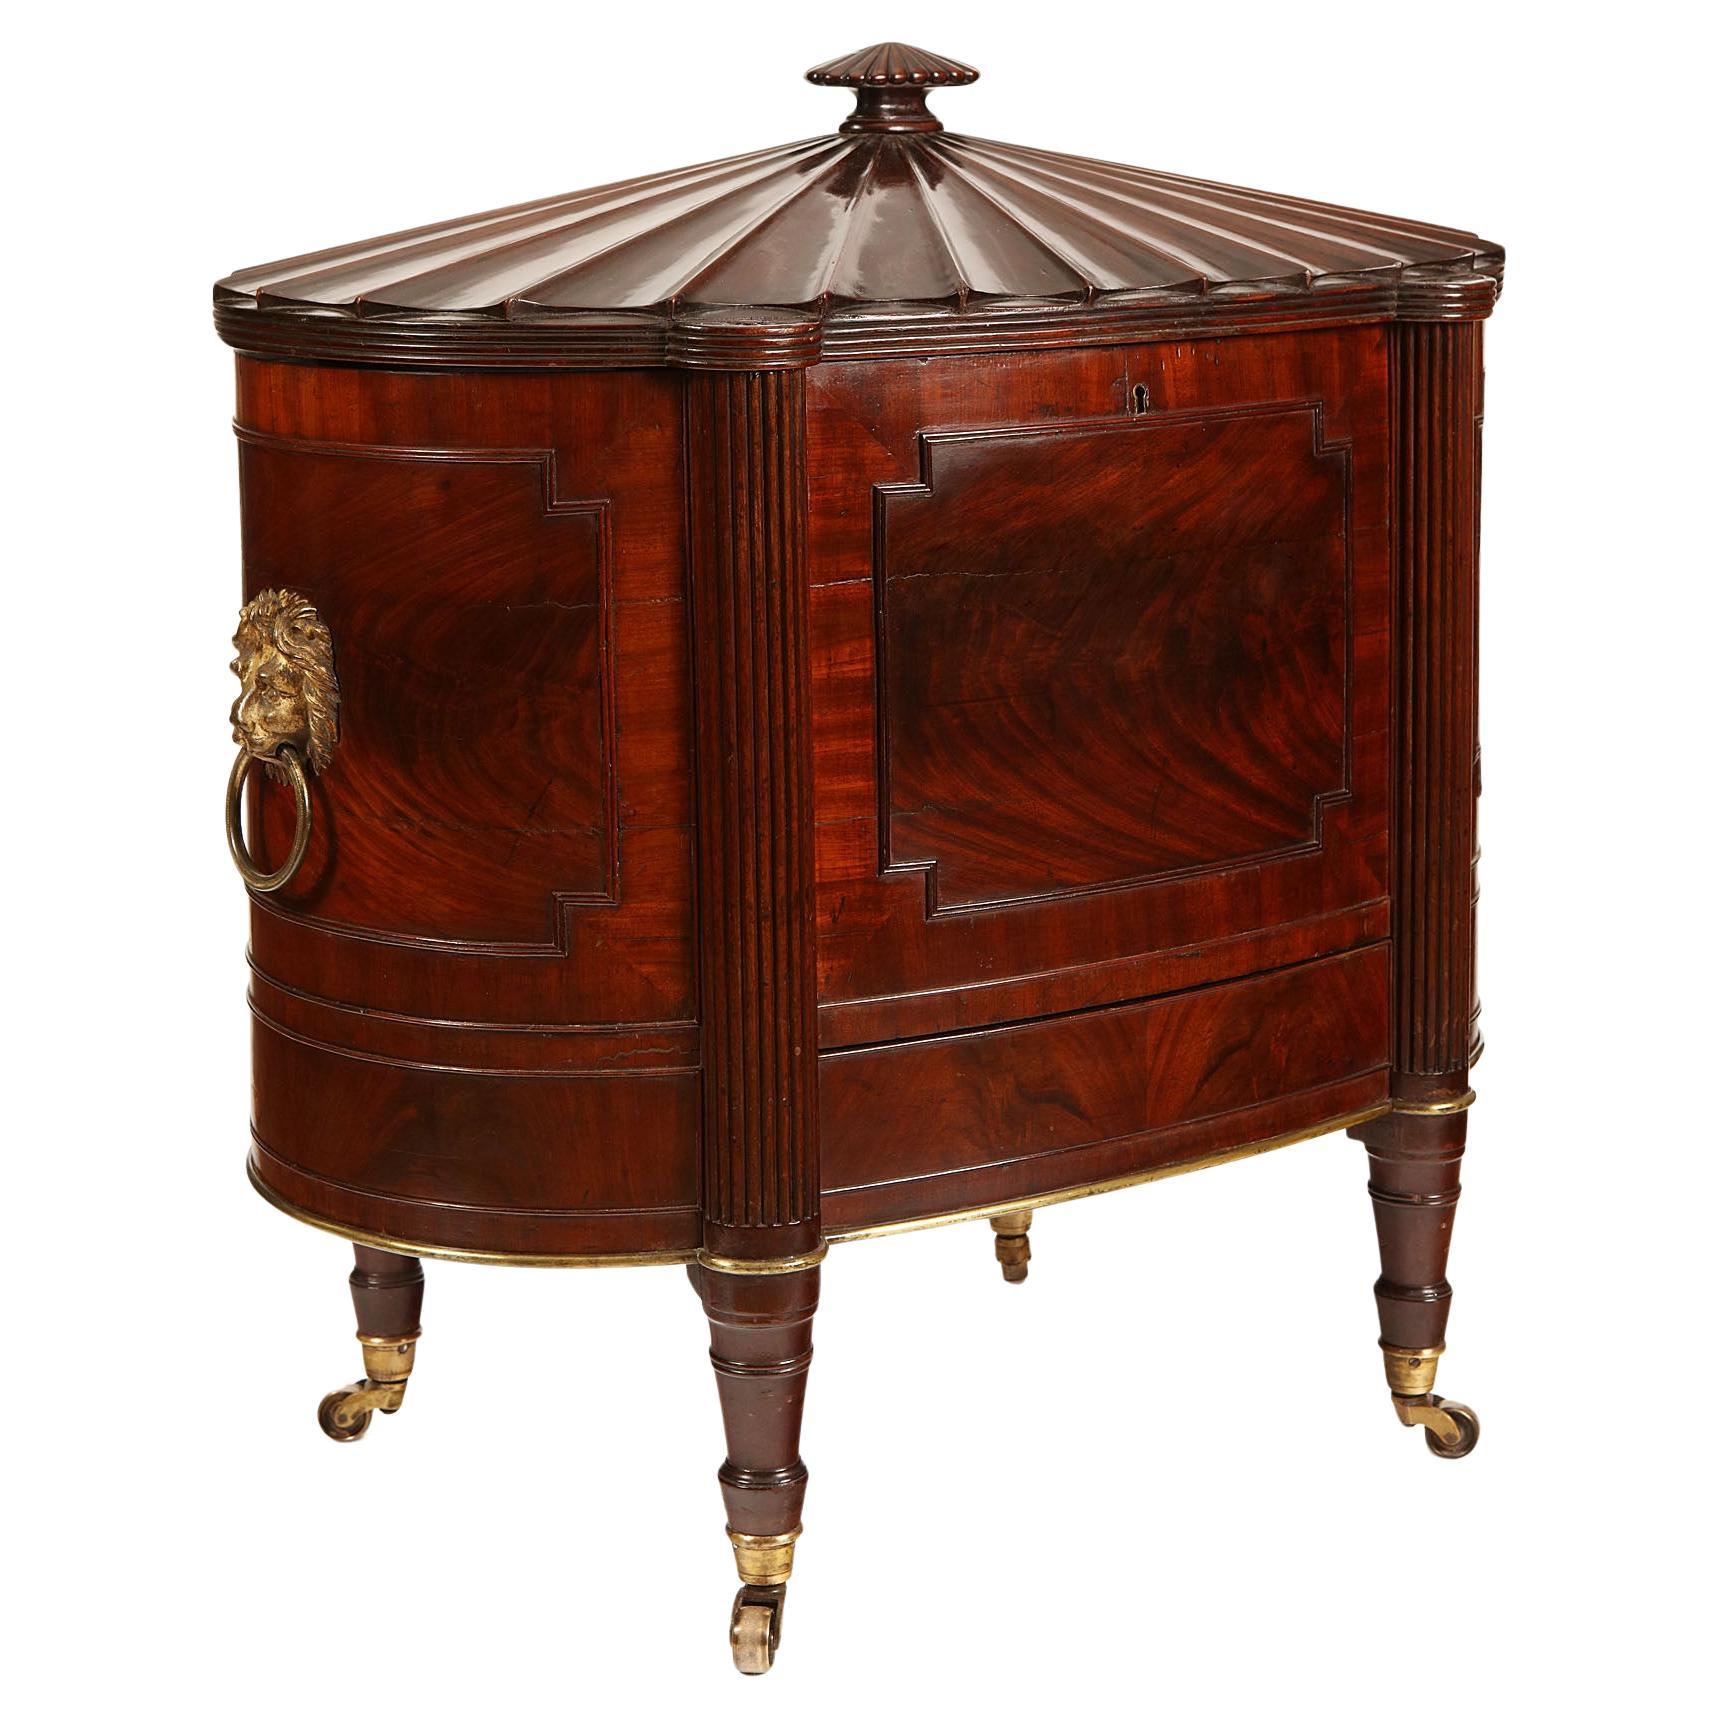 An exceptional George III mahogany cellaret, attributed to Gillows of London and